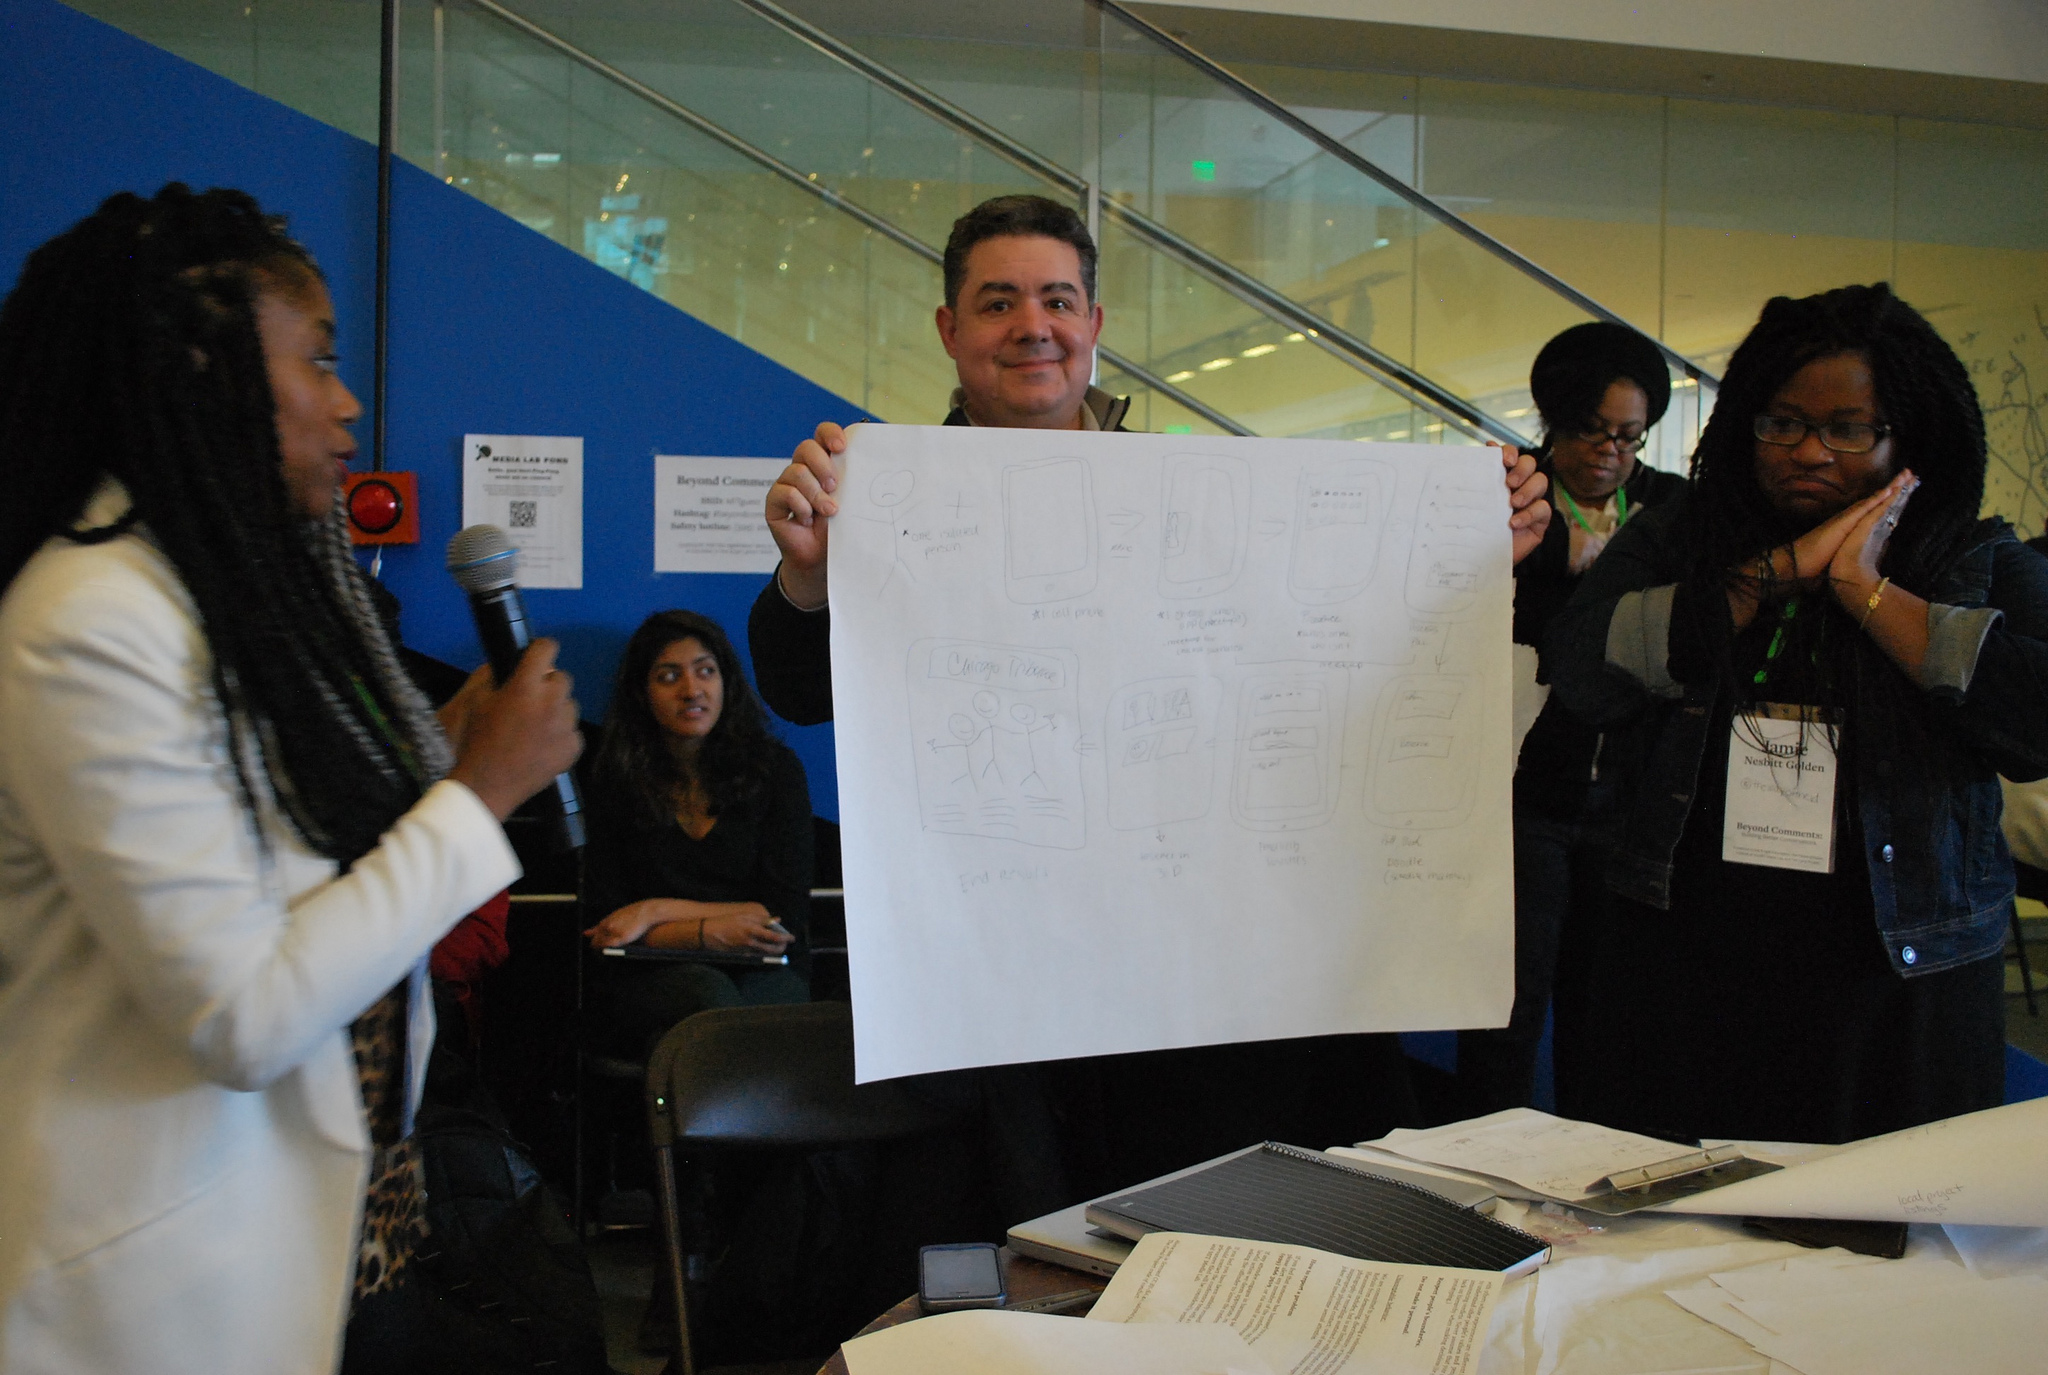 [IMAGE] A paper prototype presentation from Beyond Comments at the MIT Media Lab. Three people stand in front of a table with the person in the center holding a large piece of paper containing rough sketches. Behind them are various presenters. The person on the left has a microphone.